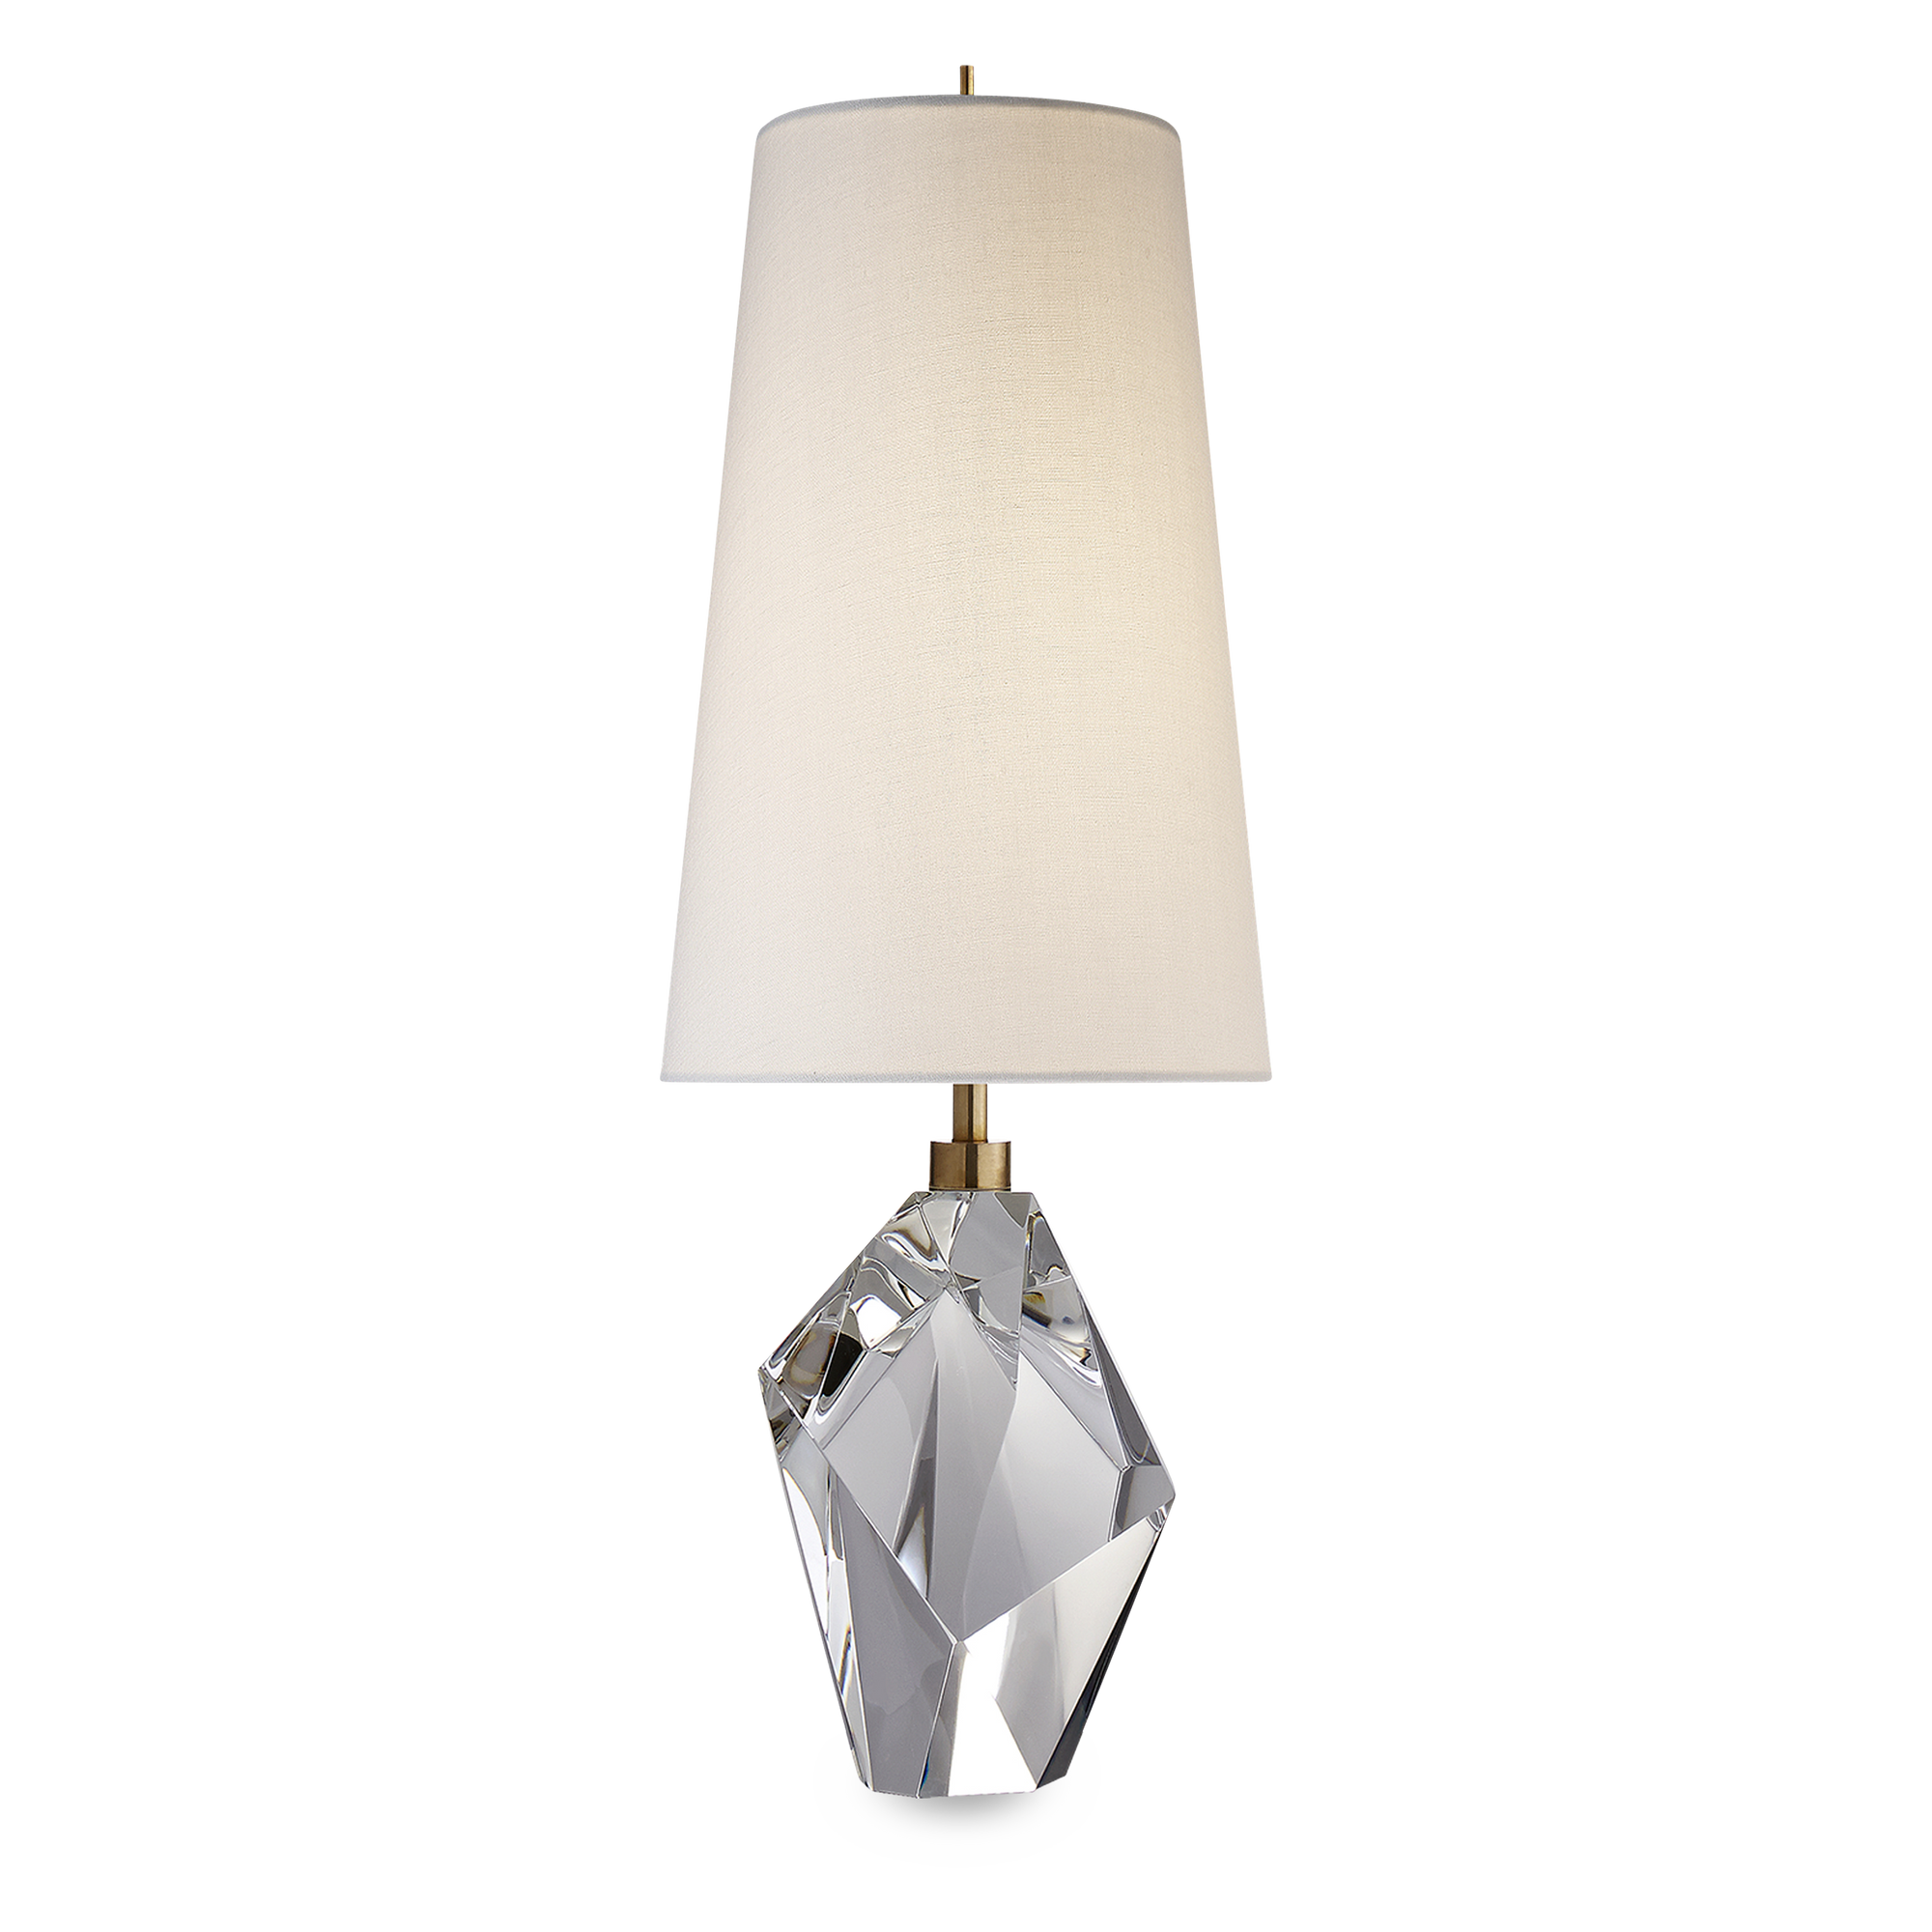 The stunning Halcyon lamp features a slender linen shade atop a spectacular crystal base which reflects light at all angles and has an undeniably radiant quality.